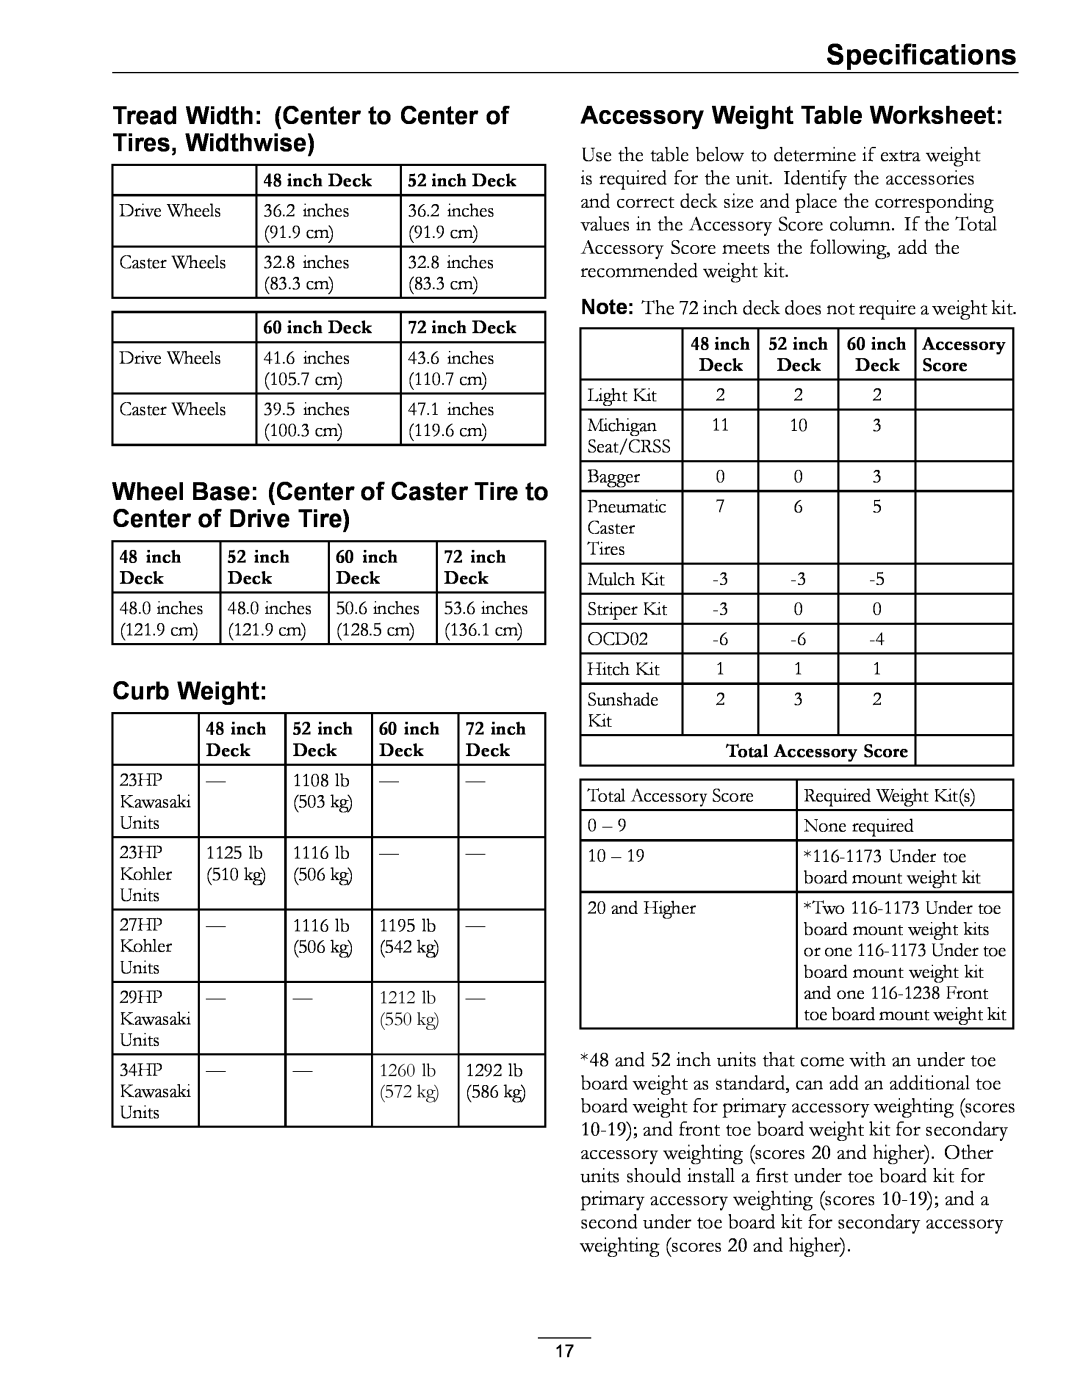 Exmark S/N 790, 4500-471 Tread Width Center to Center of Tires, Widthwise, Curb Weight, Accessory Weight Table Worksheet 